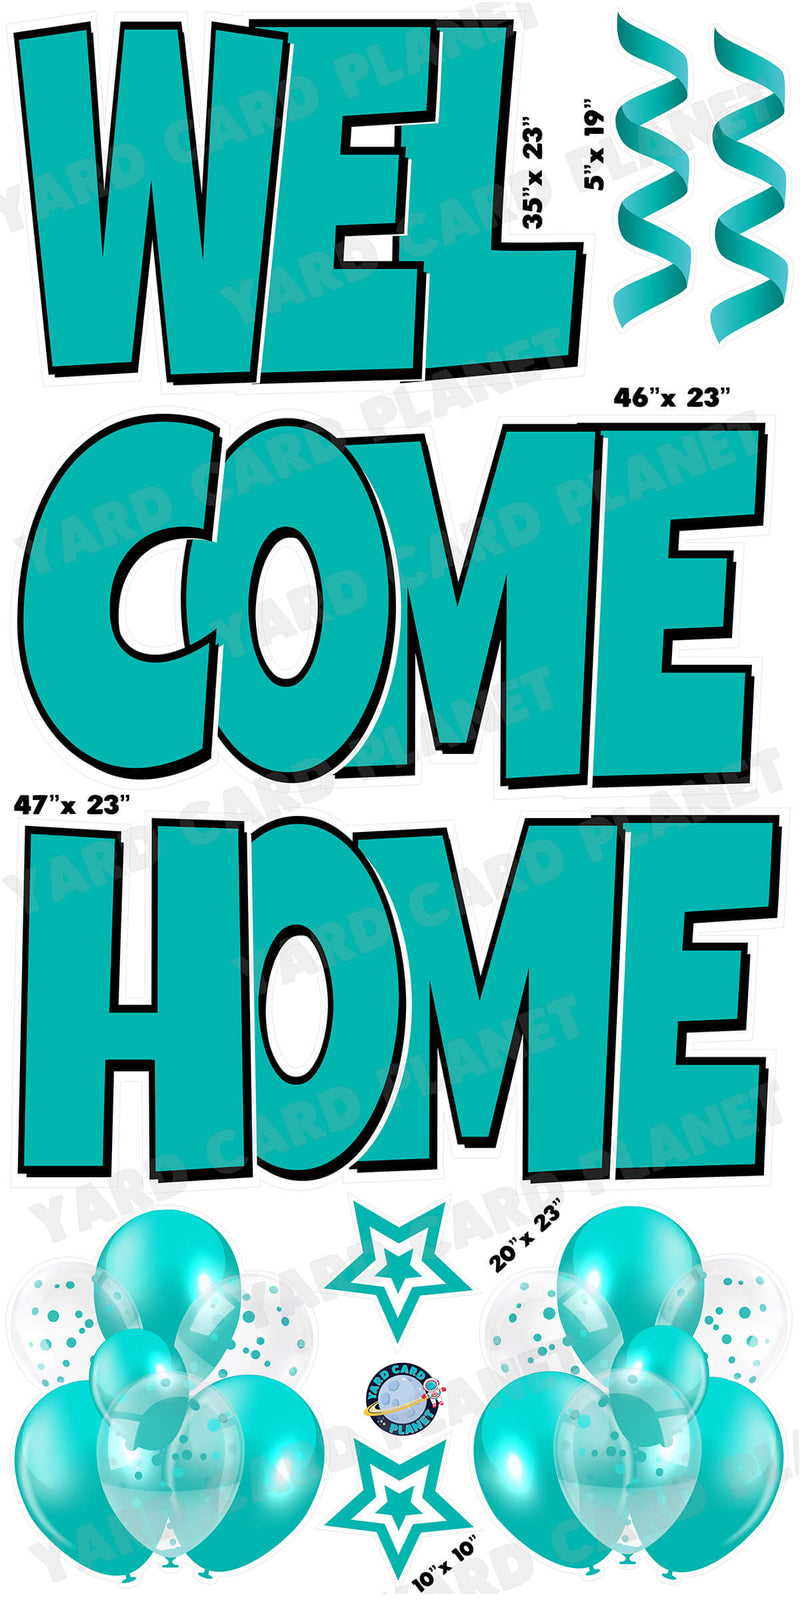 Large 23" Welcome Home Yard Card EZ Quick Sets in Luckiest Guy Font and Flair in Teal Solid Color